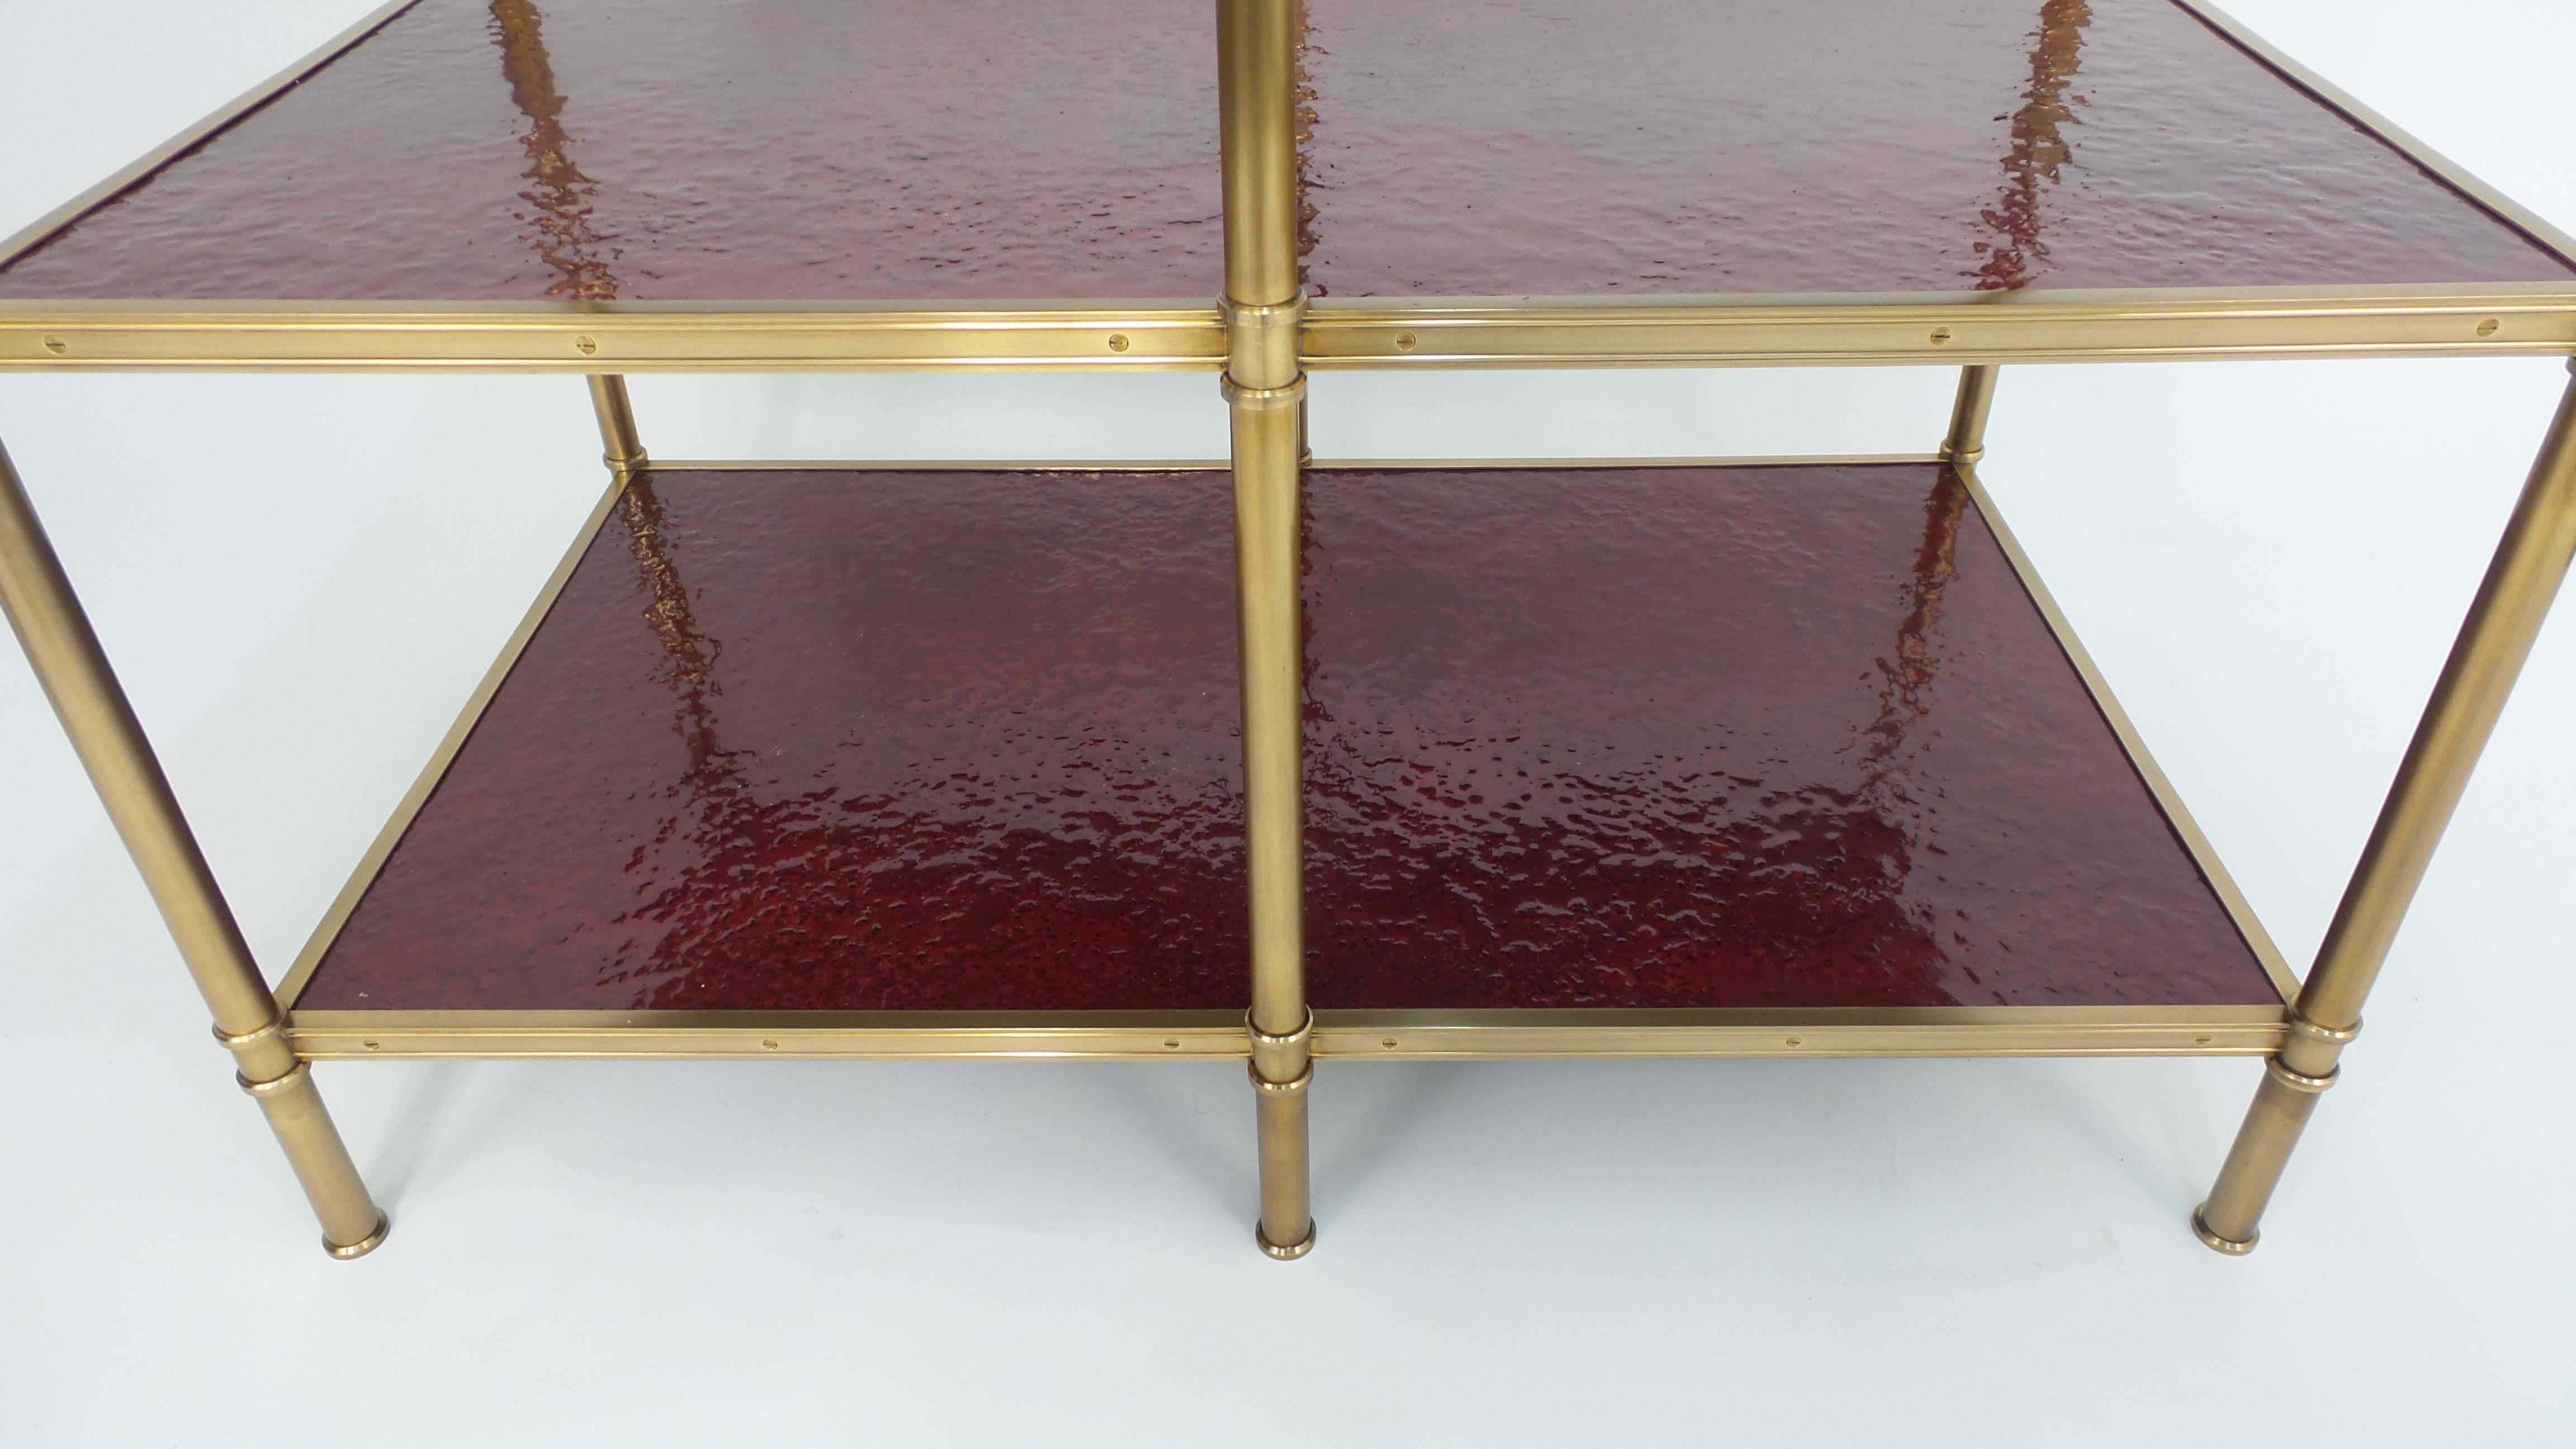 Cole Porter Etagere in Molten Gypsum In Excellent Condition For Sale In Long Island City, NY